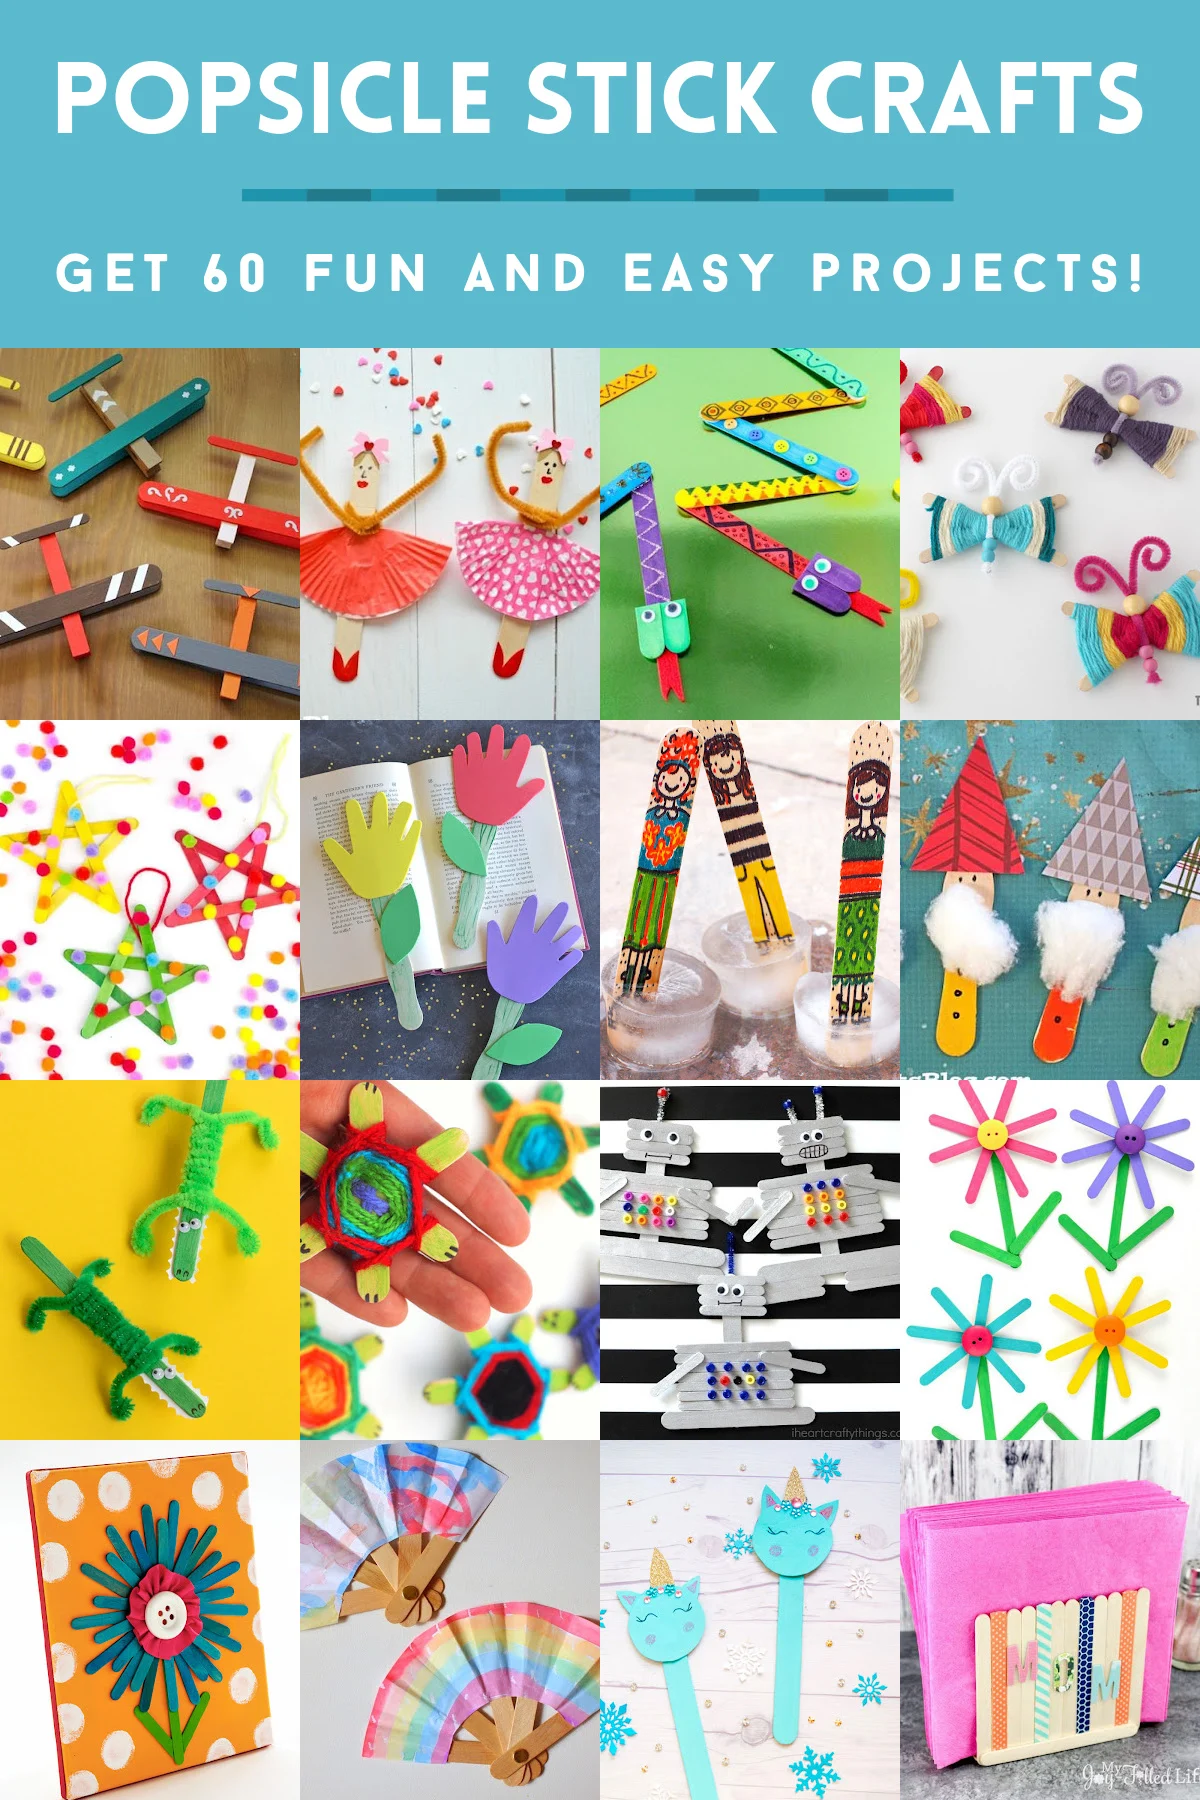 Popsicle Stick Crafts: Fun Ideas for Kids of All Ages! - Mod Podge Rocks